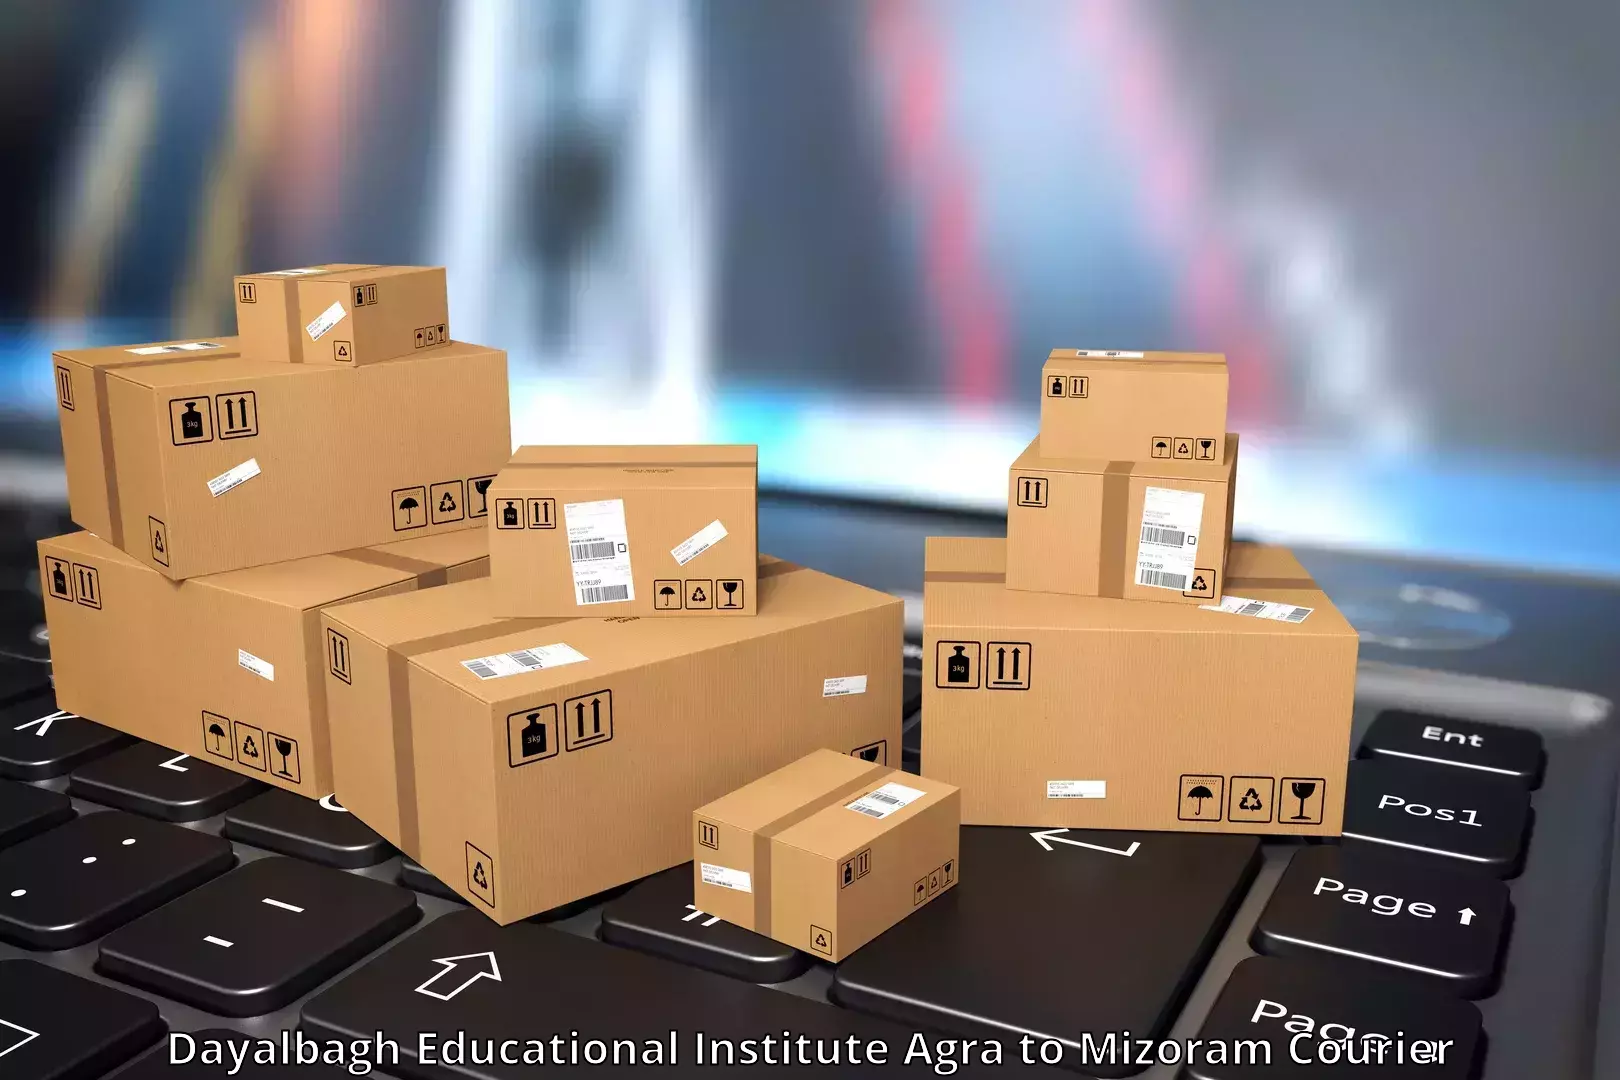 Advanced shipping services Dayalbagh Educational Institute Agra to Mizoram